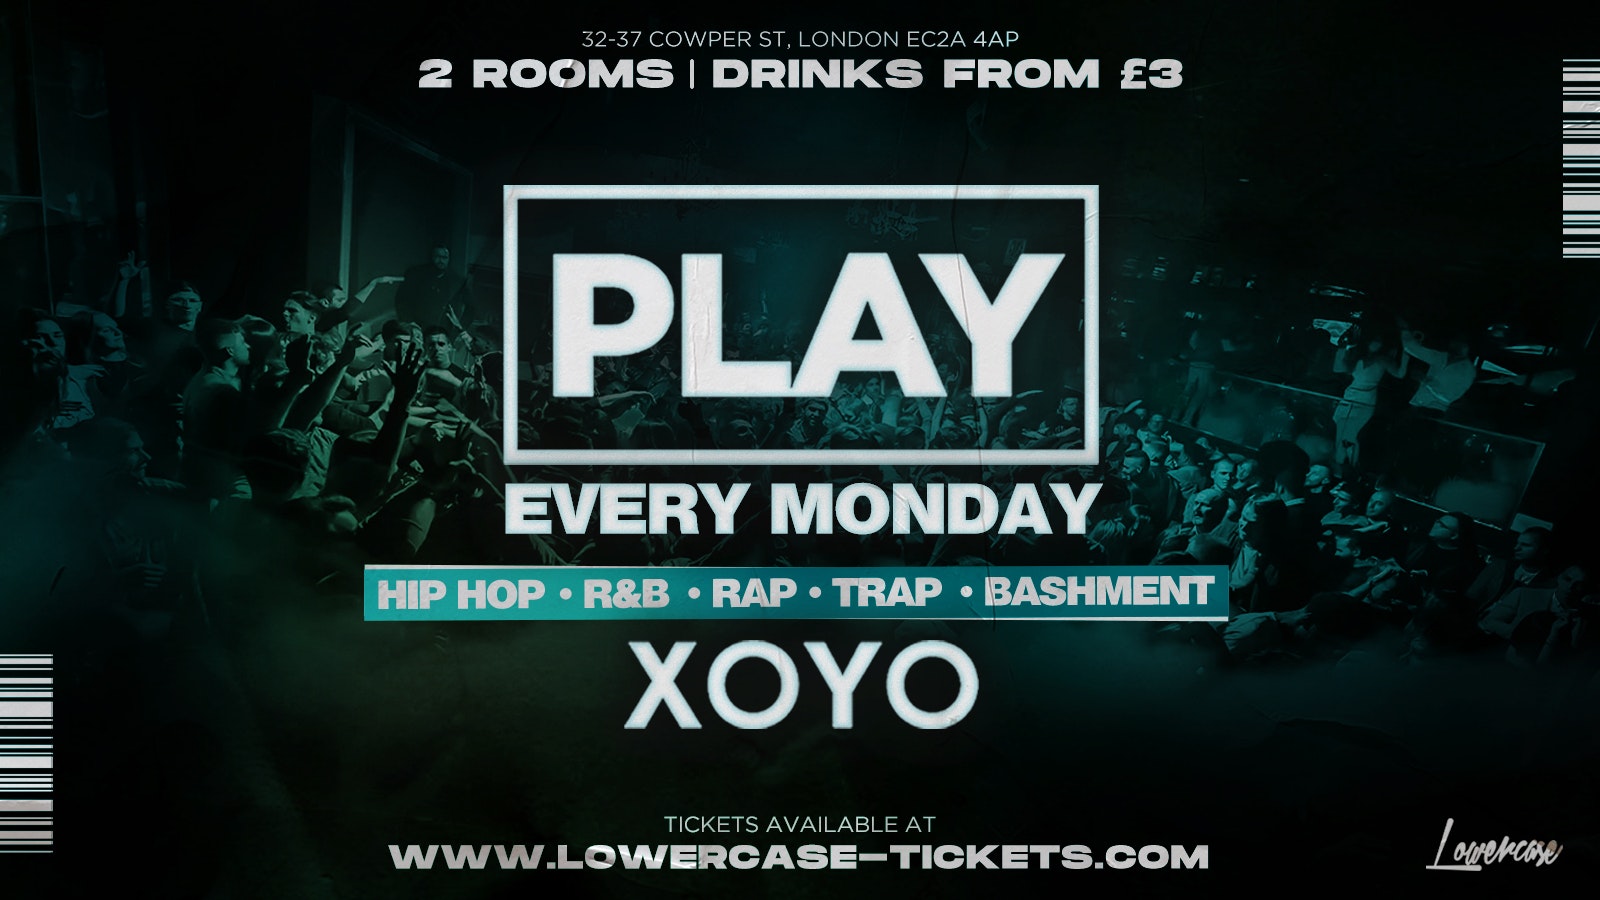 Play London @ XOYO – The Biggest Weekly Monday Student Night